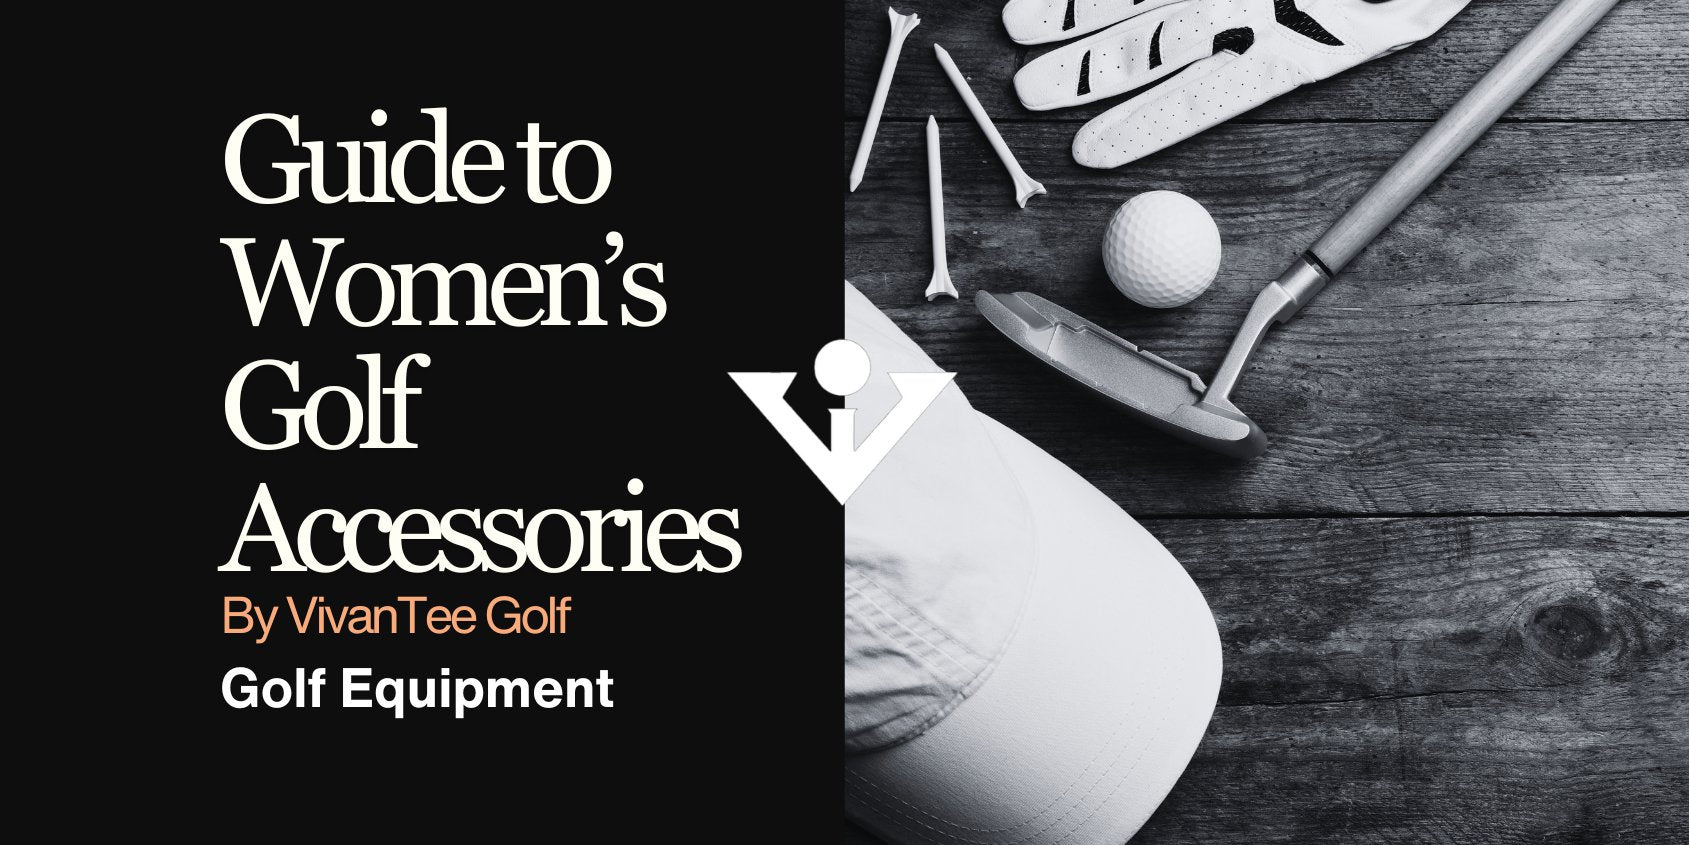 Women's golf accessories guide with a black and white picture, show casing a golf putter, tees, and golf ball.